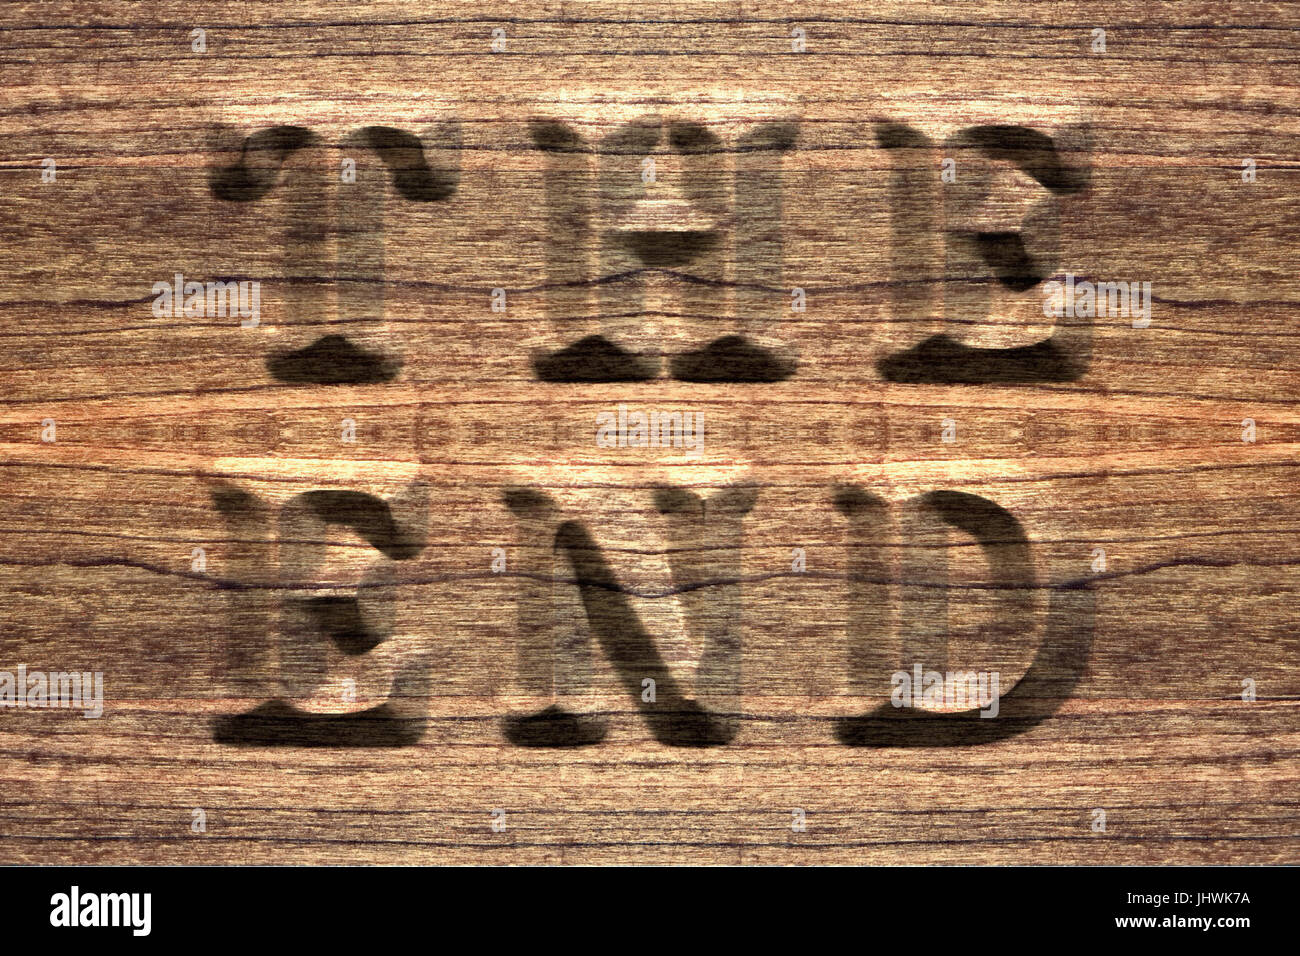 The end, sign on a seamless rustic wooden board, embossed letters. Stock Photo